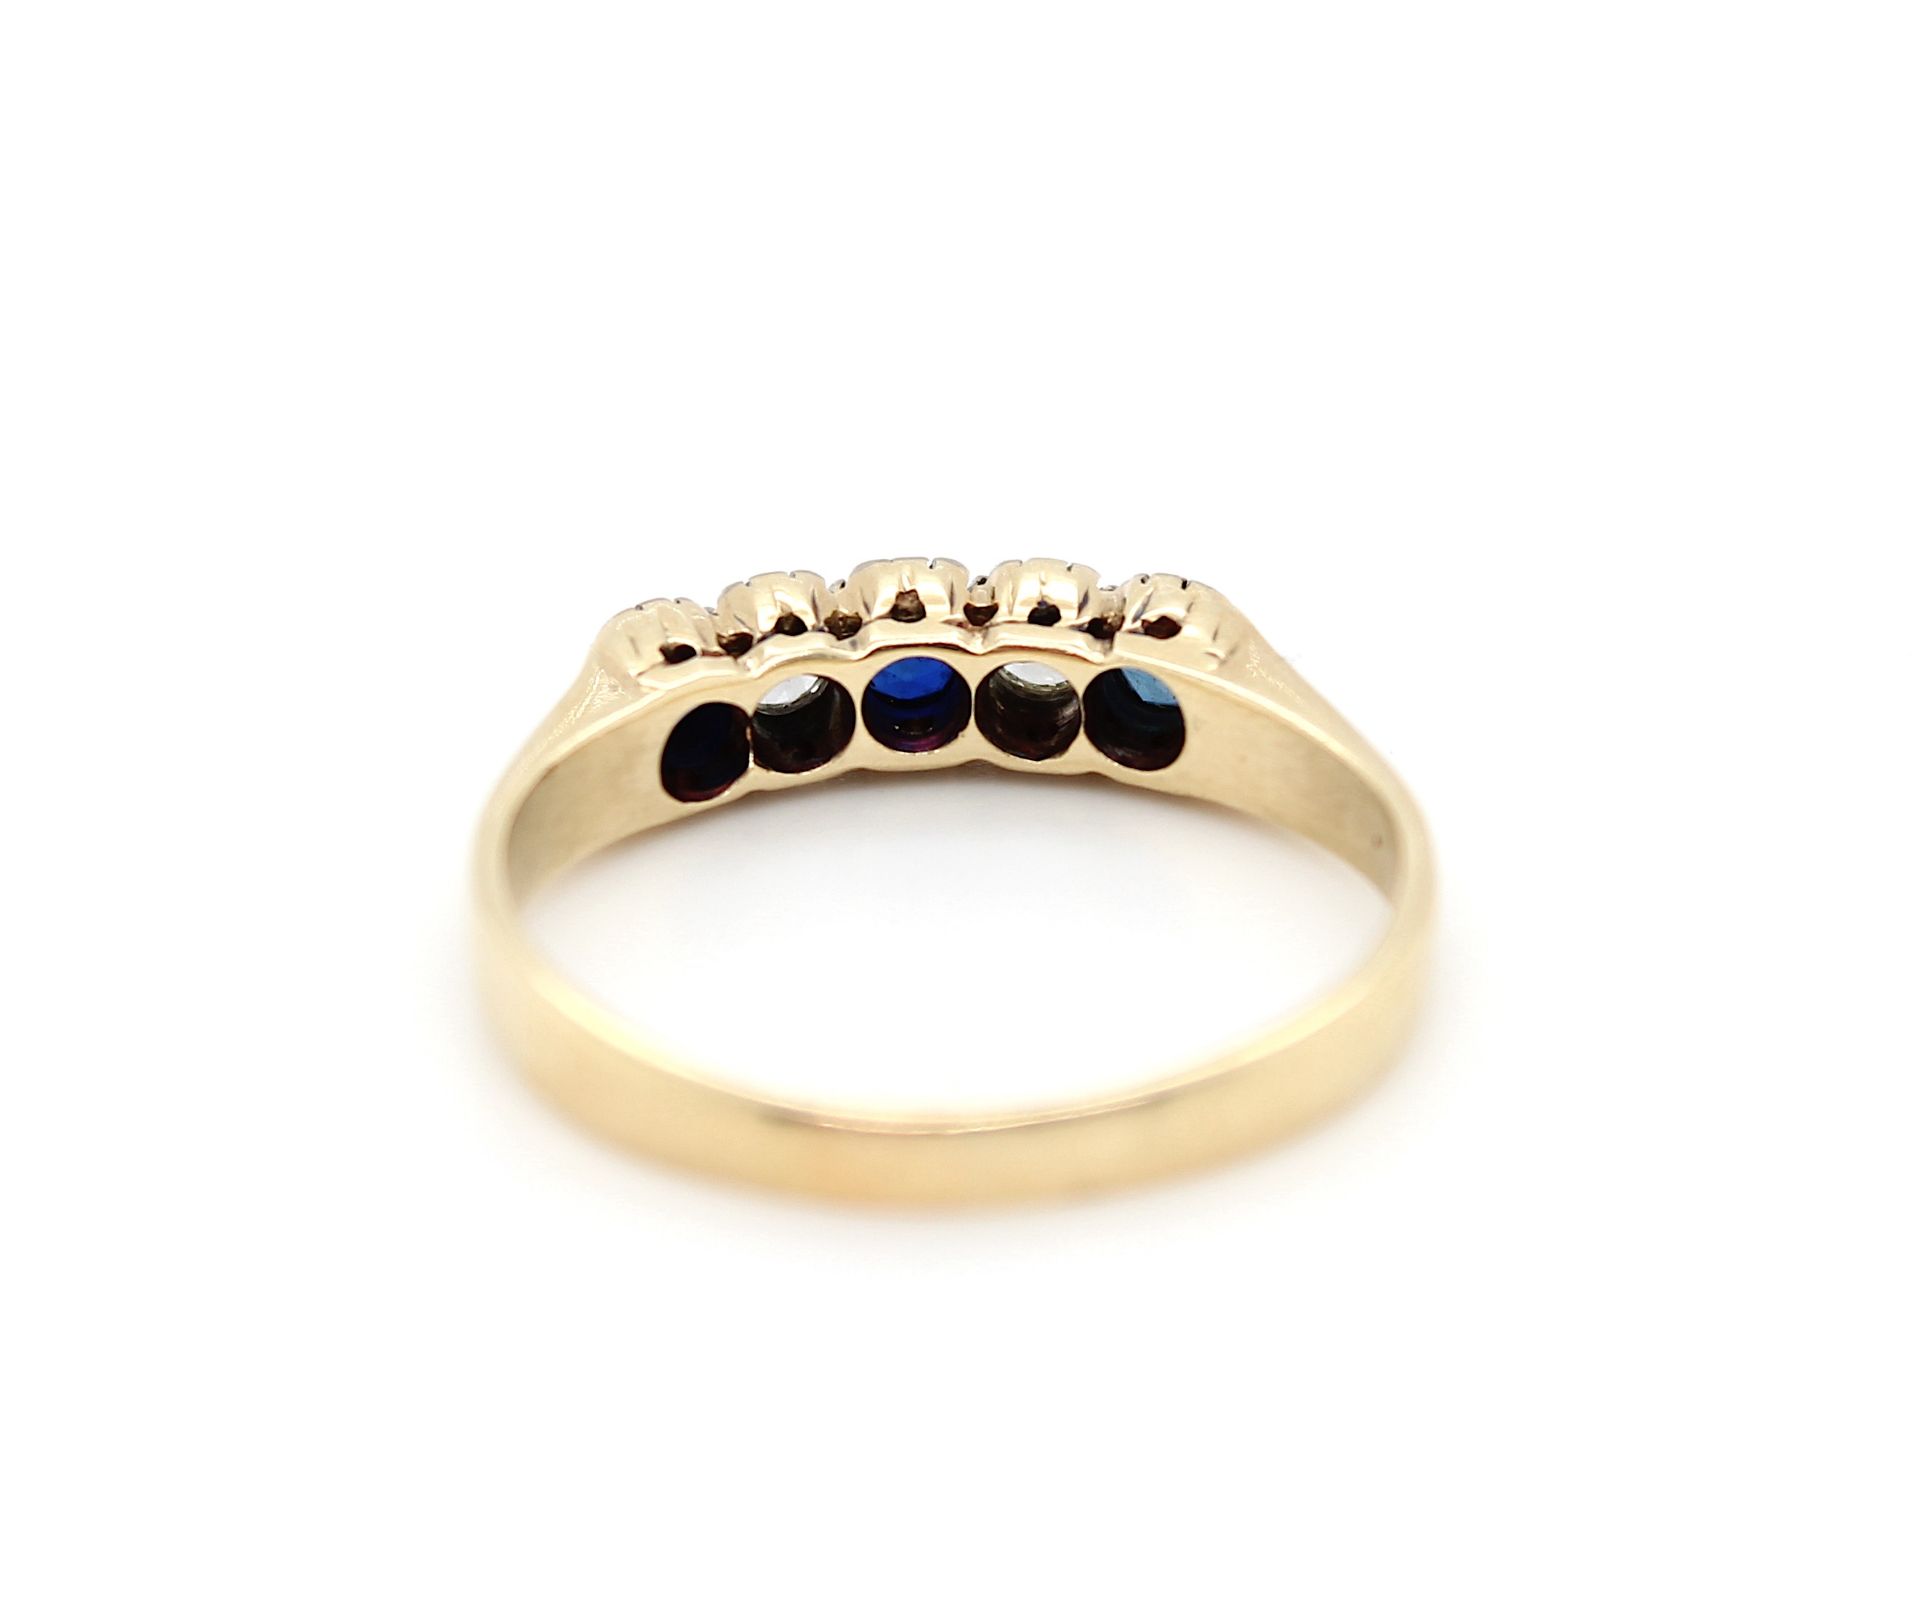 Vintage ring with sapphires and diamonds - Image 3 of 4